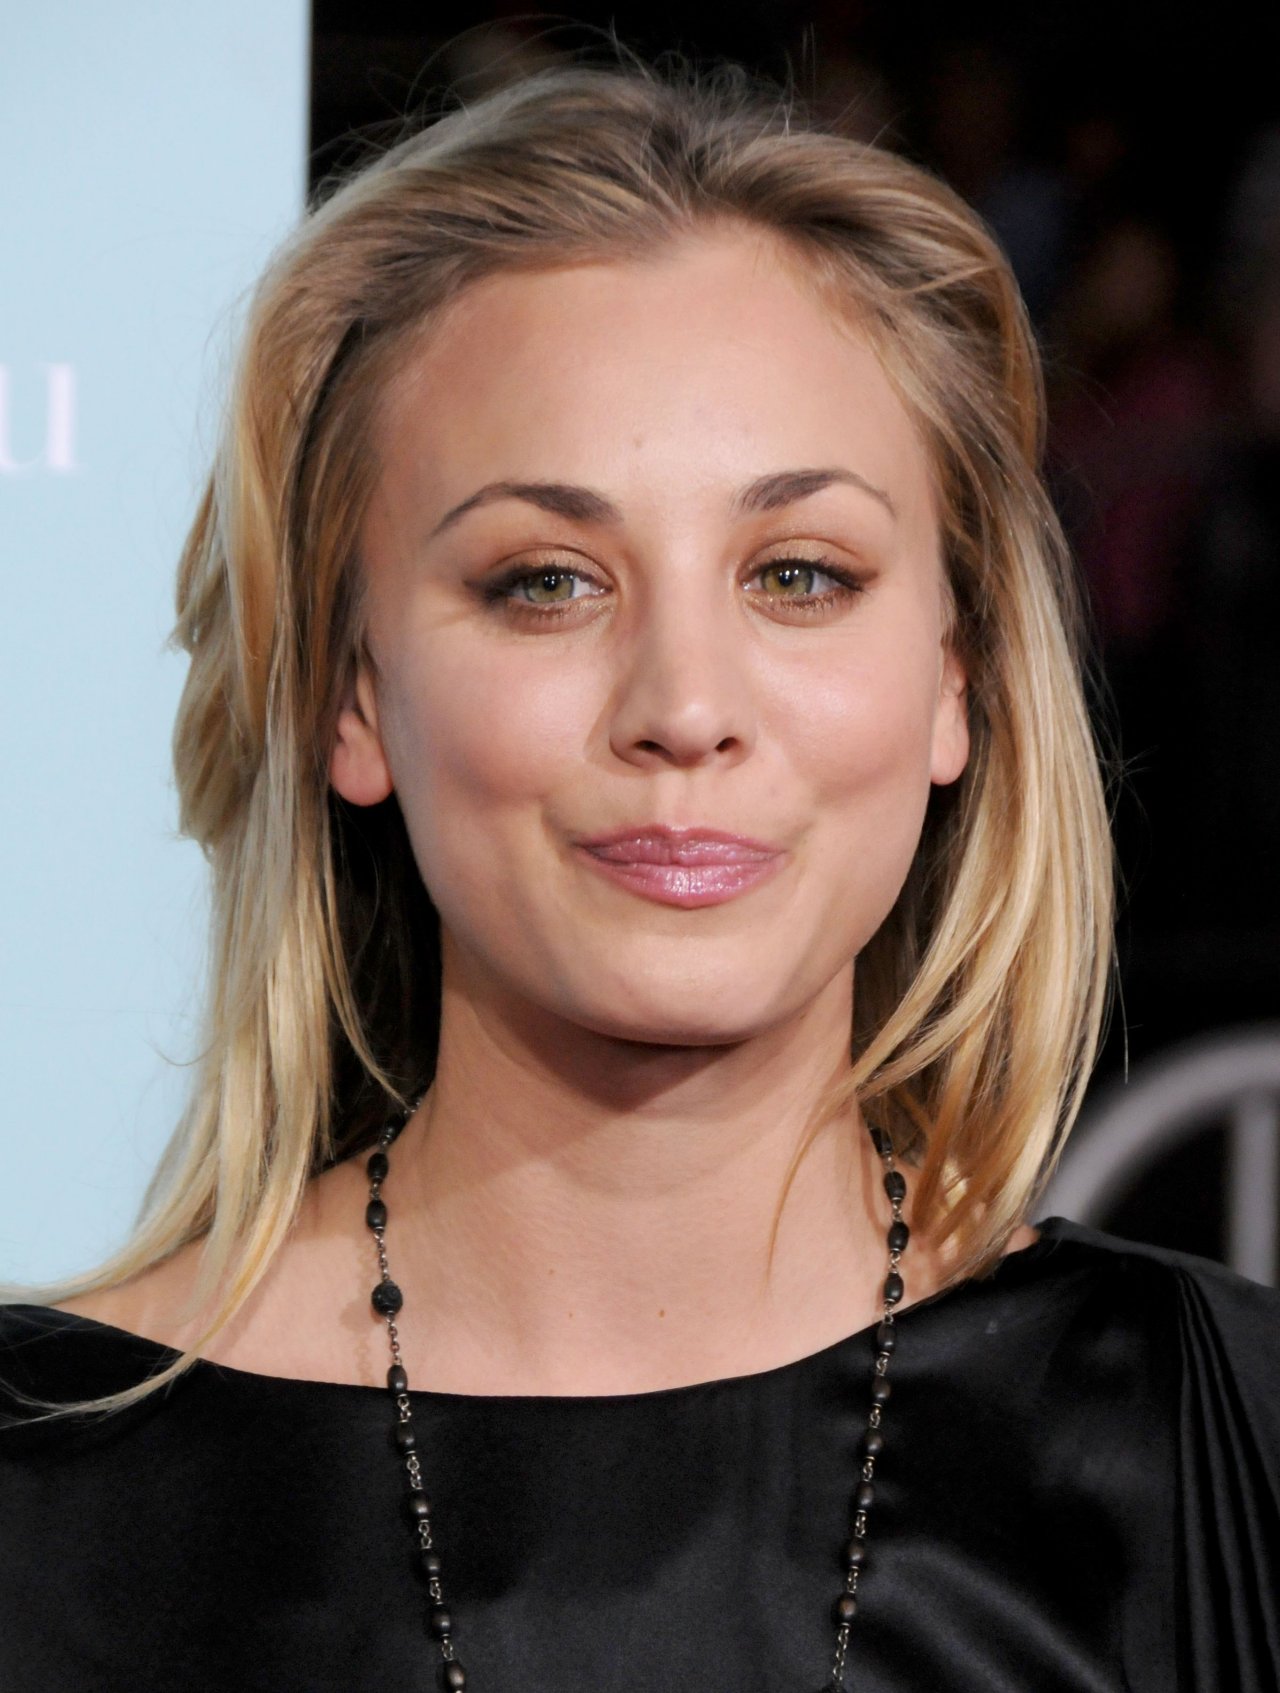 Kaley Cuoco leaked wallpapers